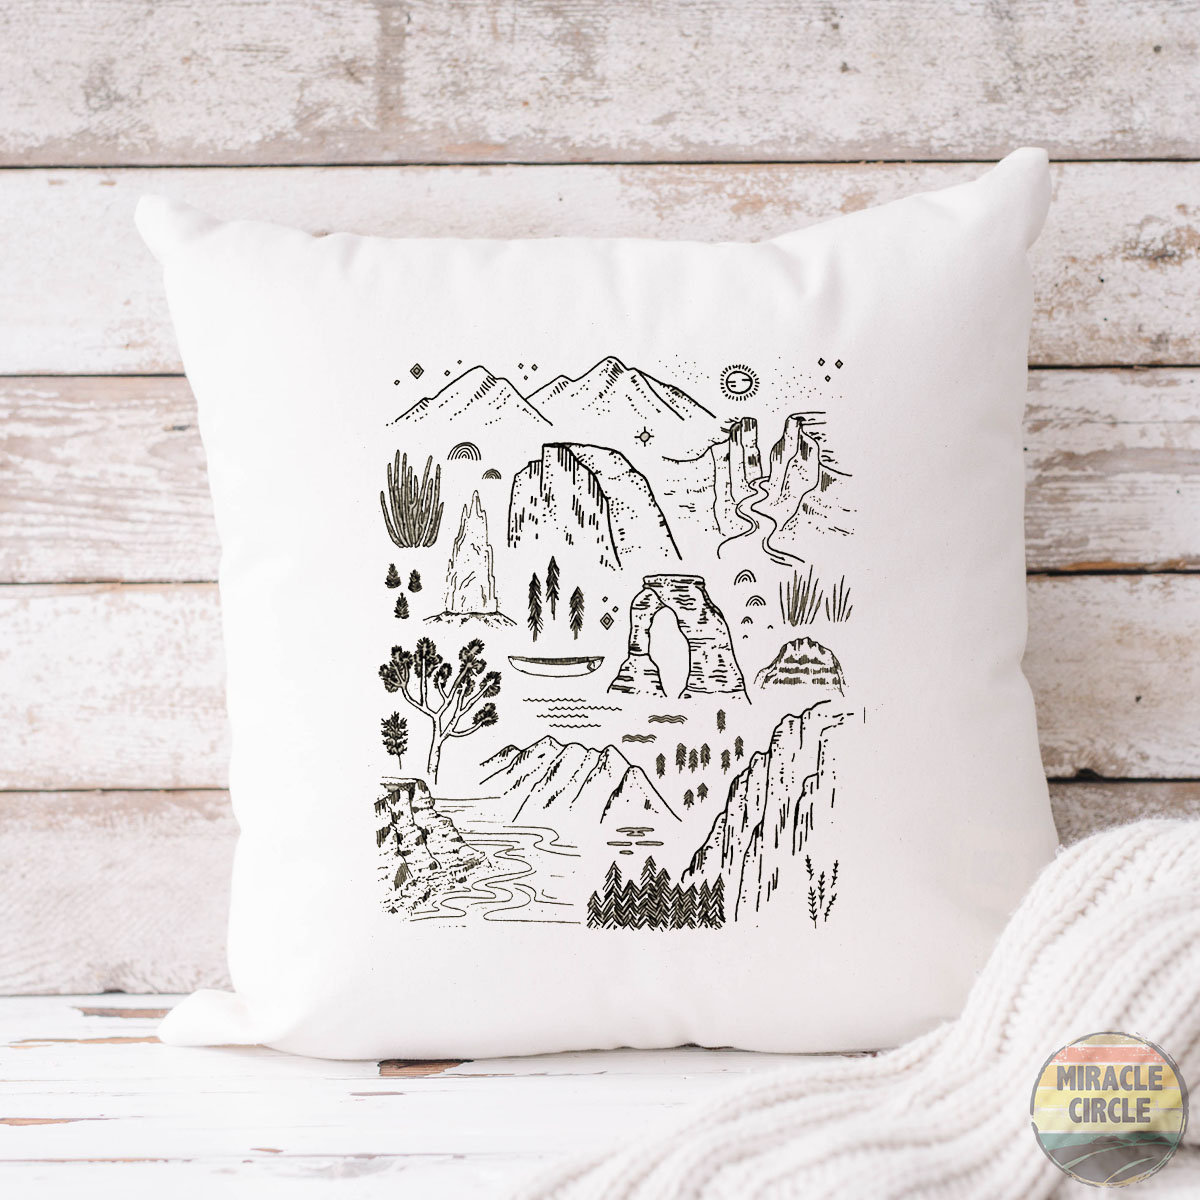 18x18 Throw Pillow: Legends Of The National Parks-Extra Terrestrial -  Anderson Design Group